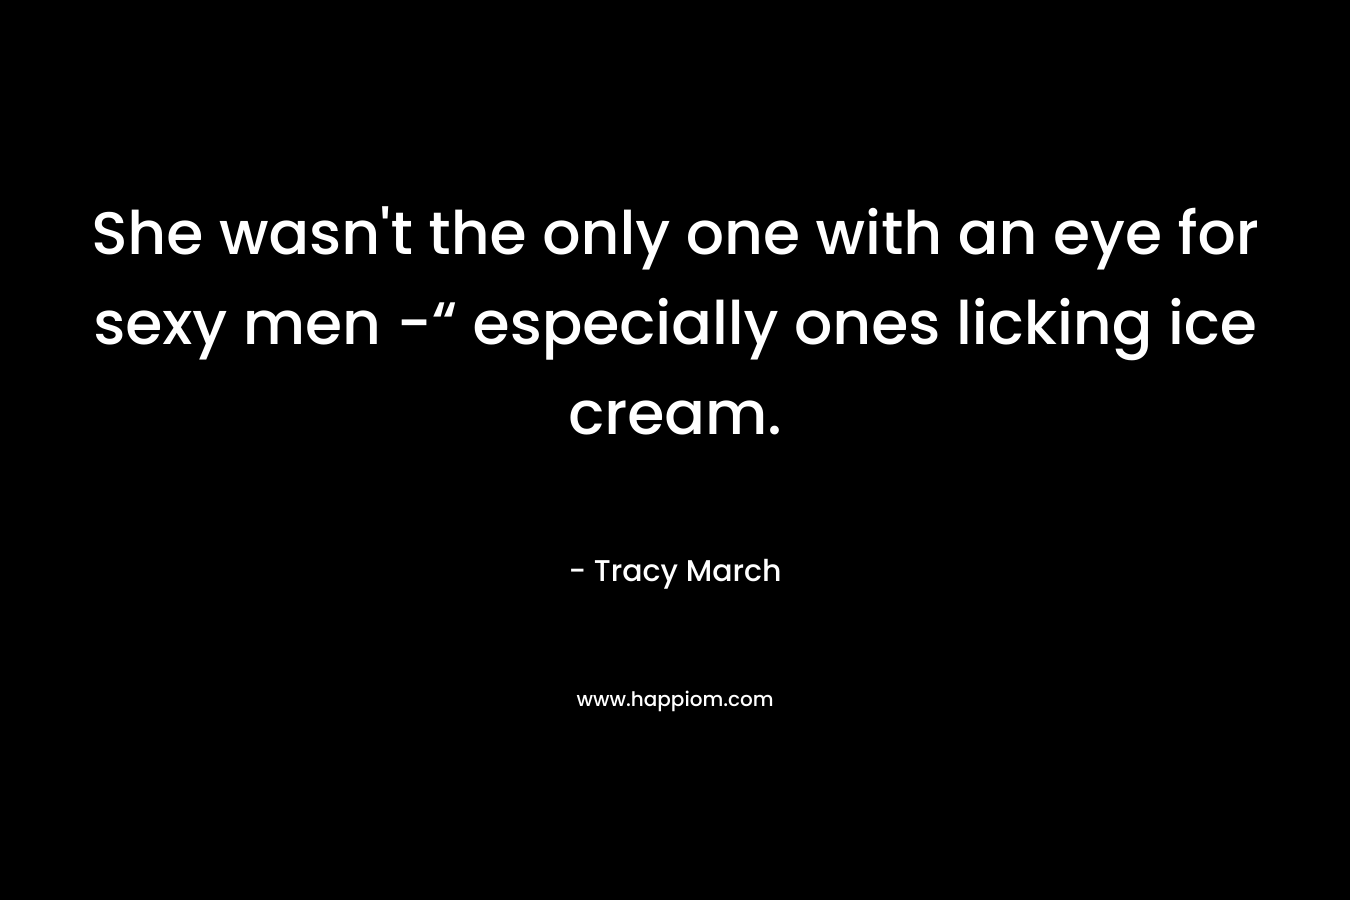 She wasn't the only one with an eye for sexy men -“ especially ones licking ice cream.